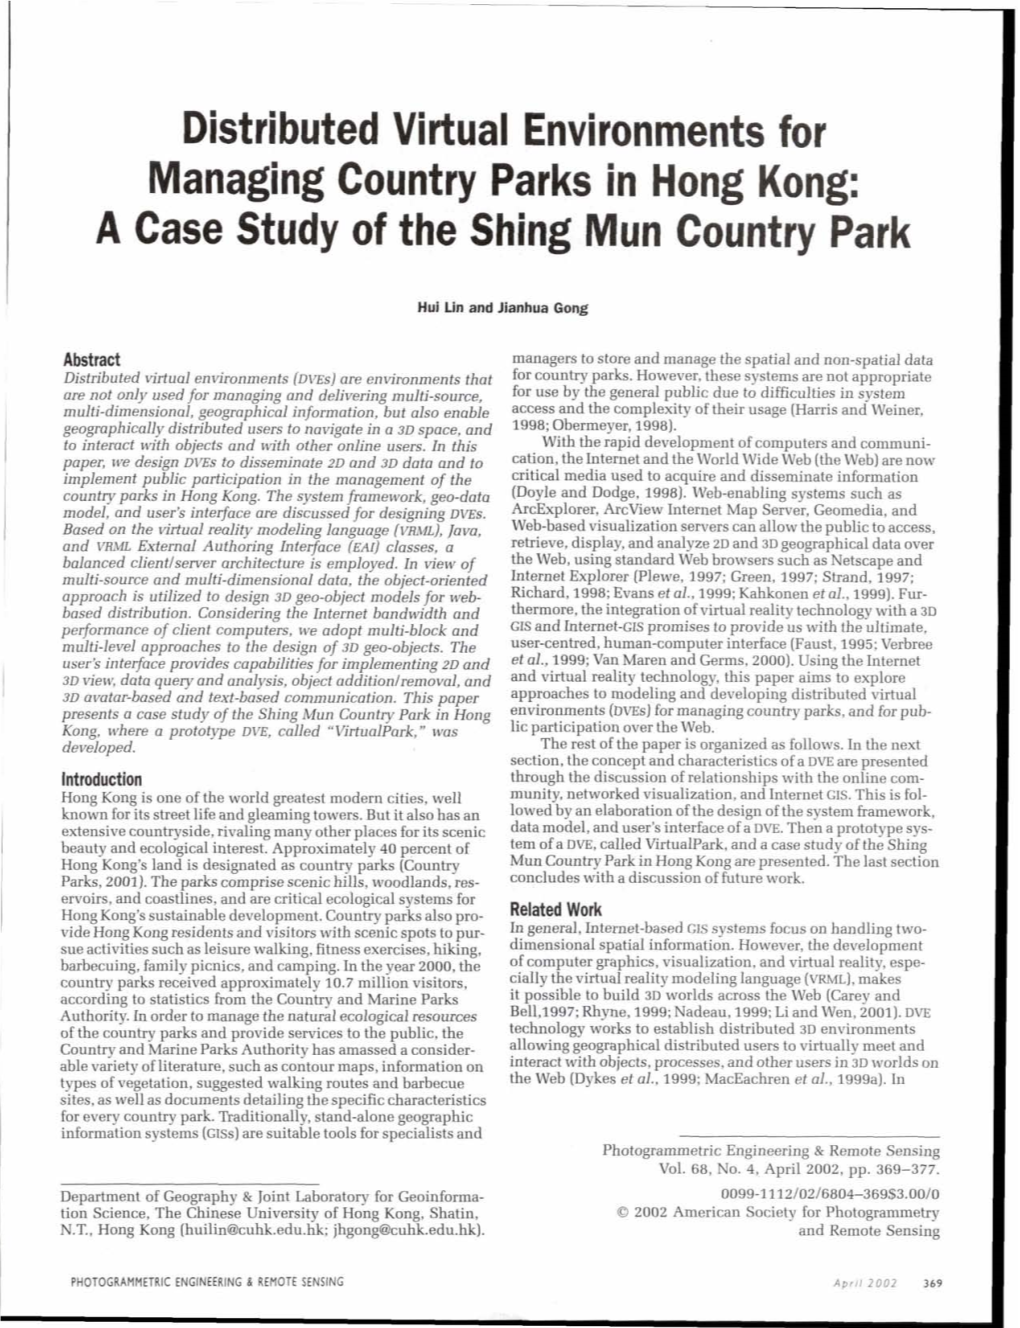 Distributed Virtual Environments for Managing Country Parks in Hong Kong: a Case Study of the Shing Mun Country Park